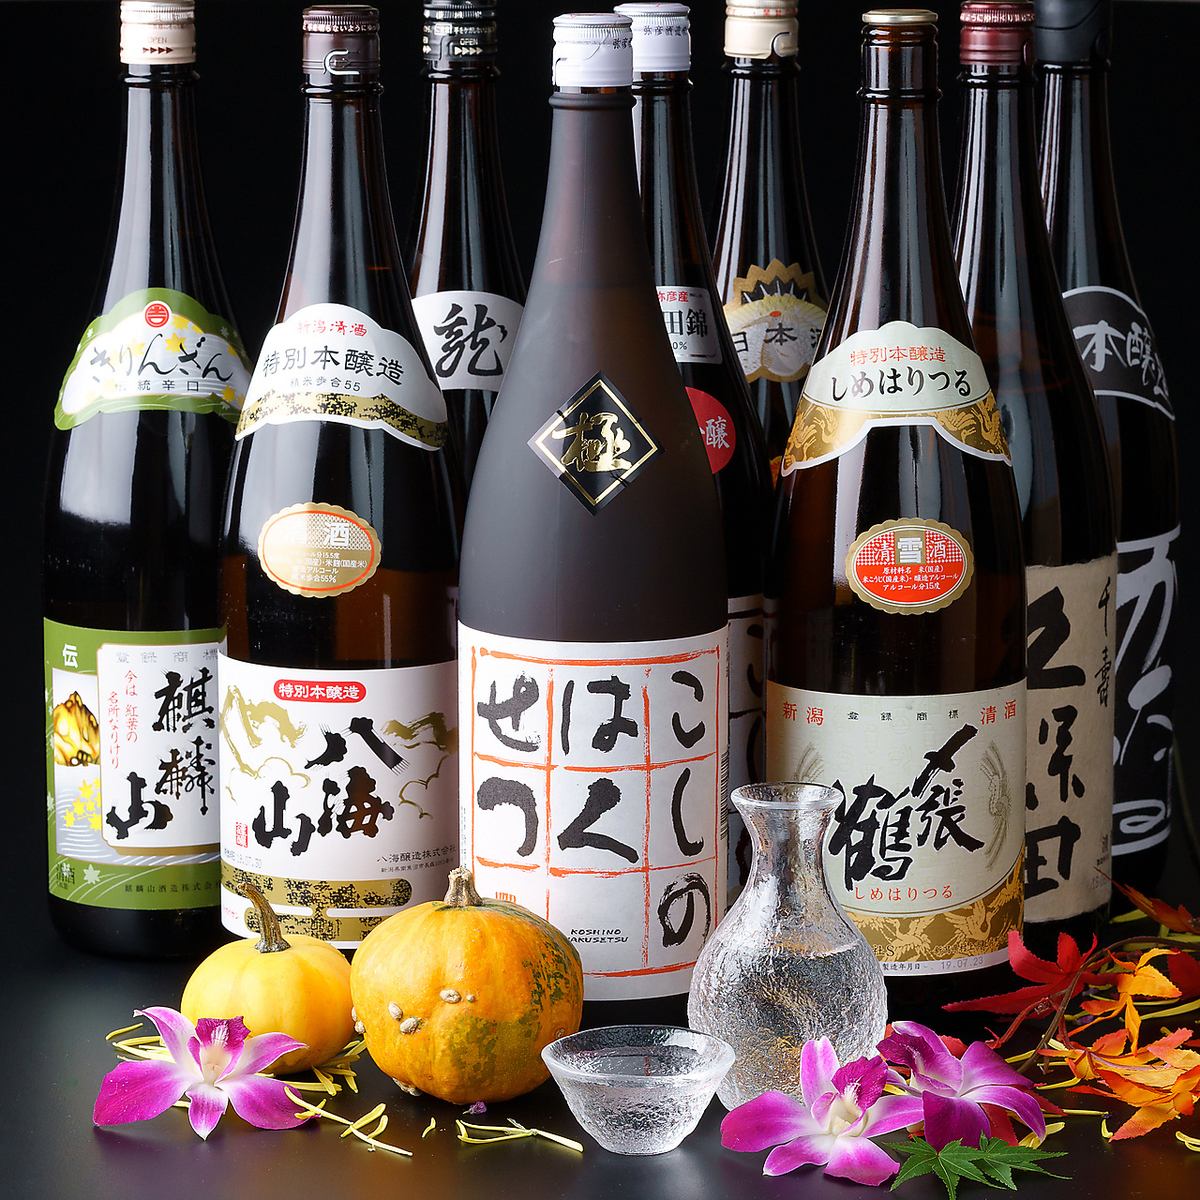 We have sake that goes perfectly with straw grilling! All-you-can-drink sake is also available◎